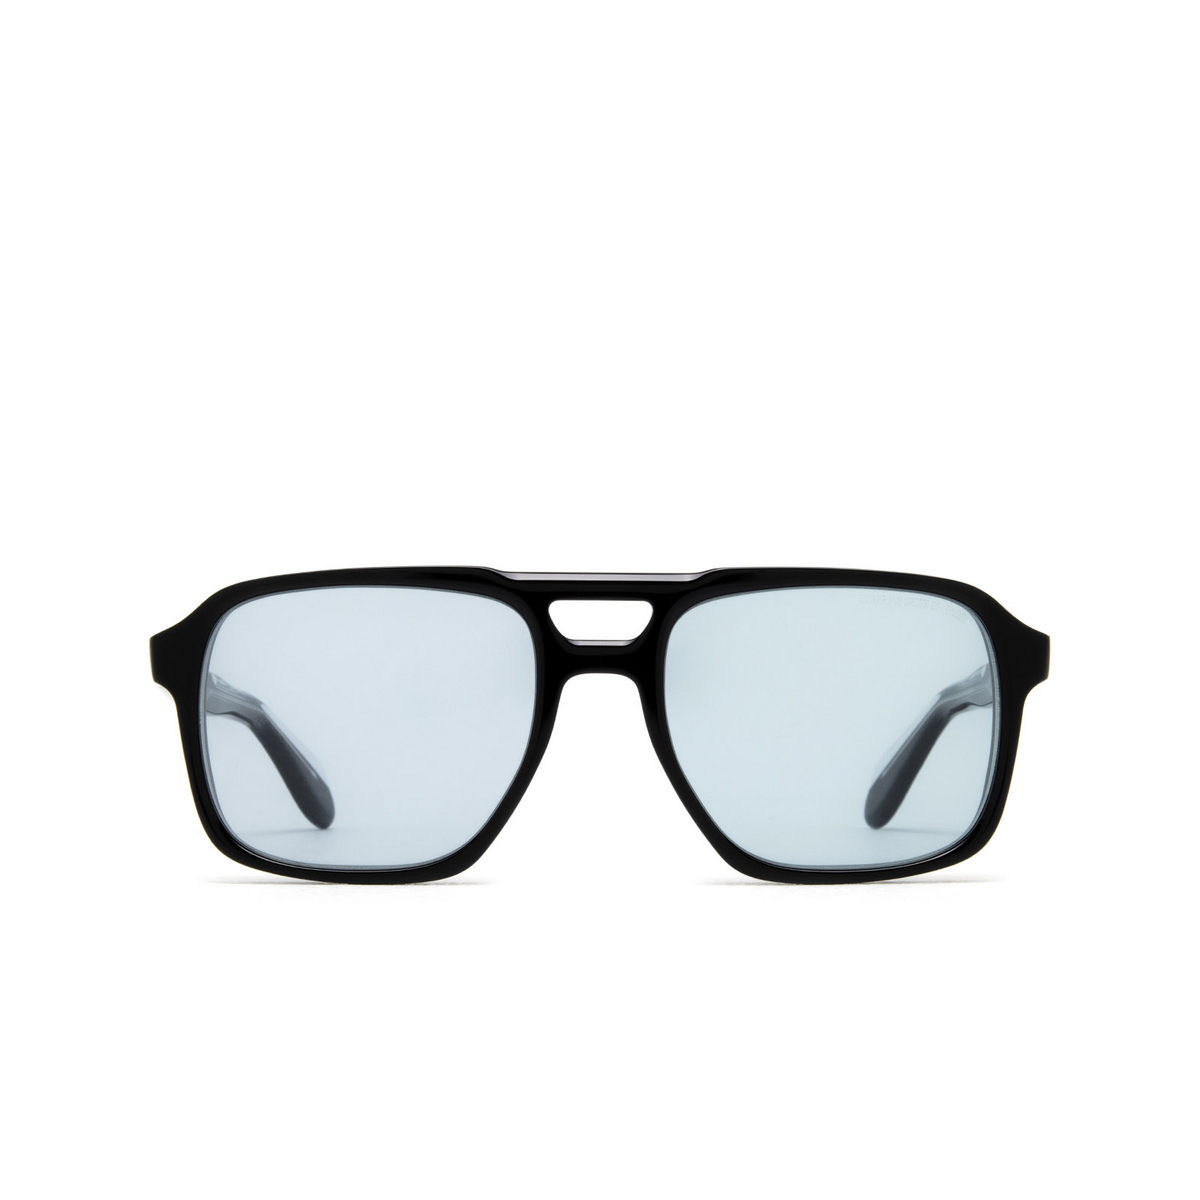 Cutler and Gross 1394 Sunglasses 01 Black - front view